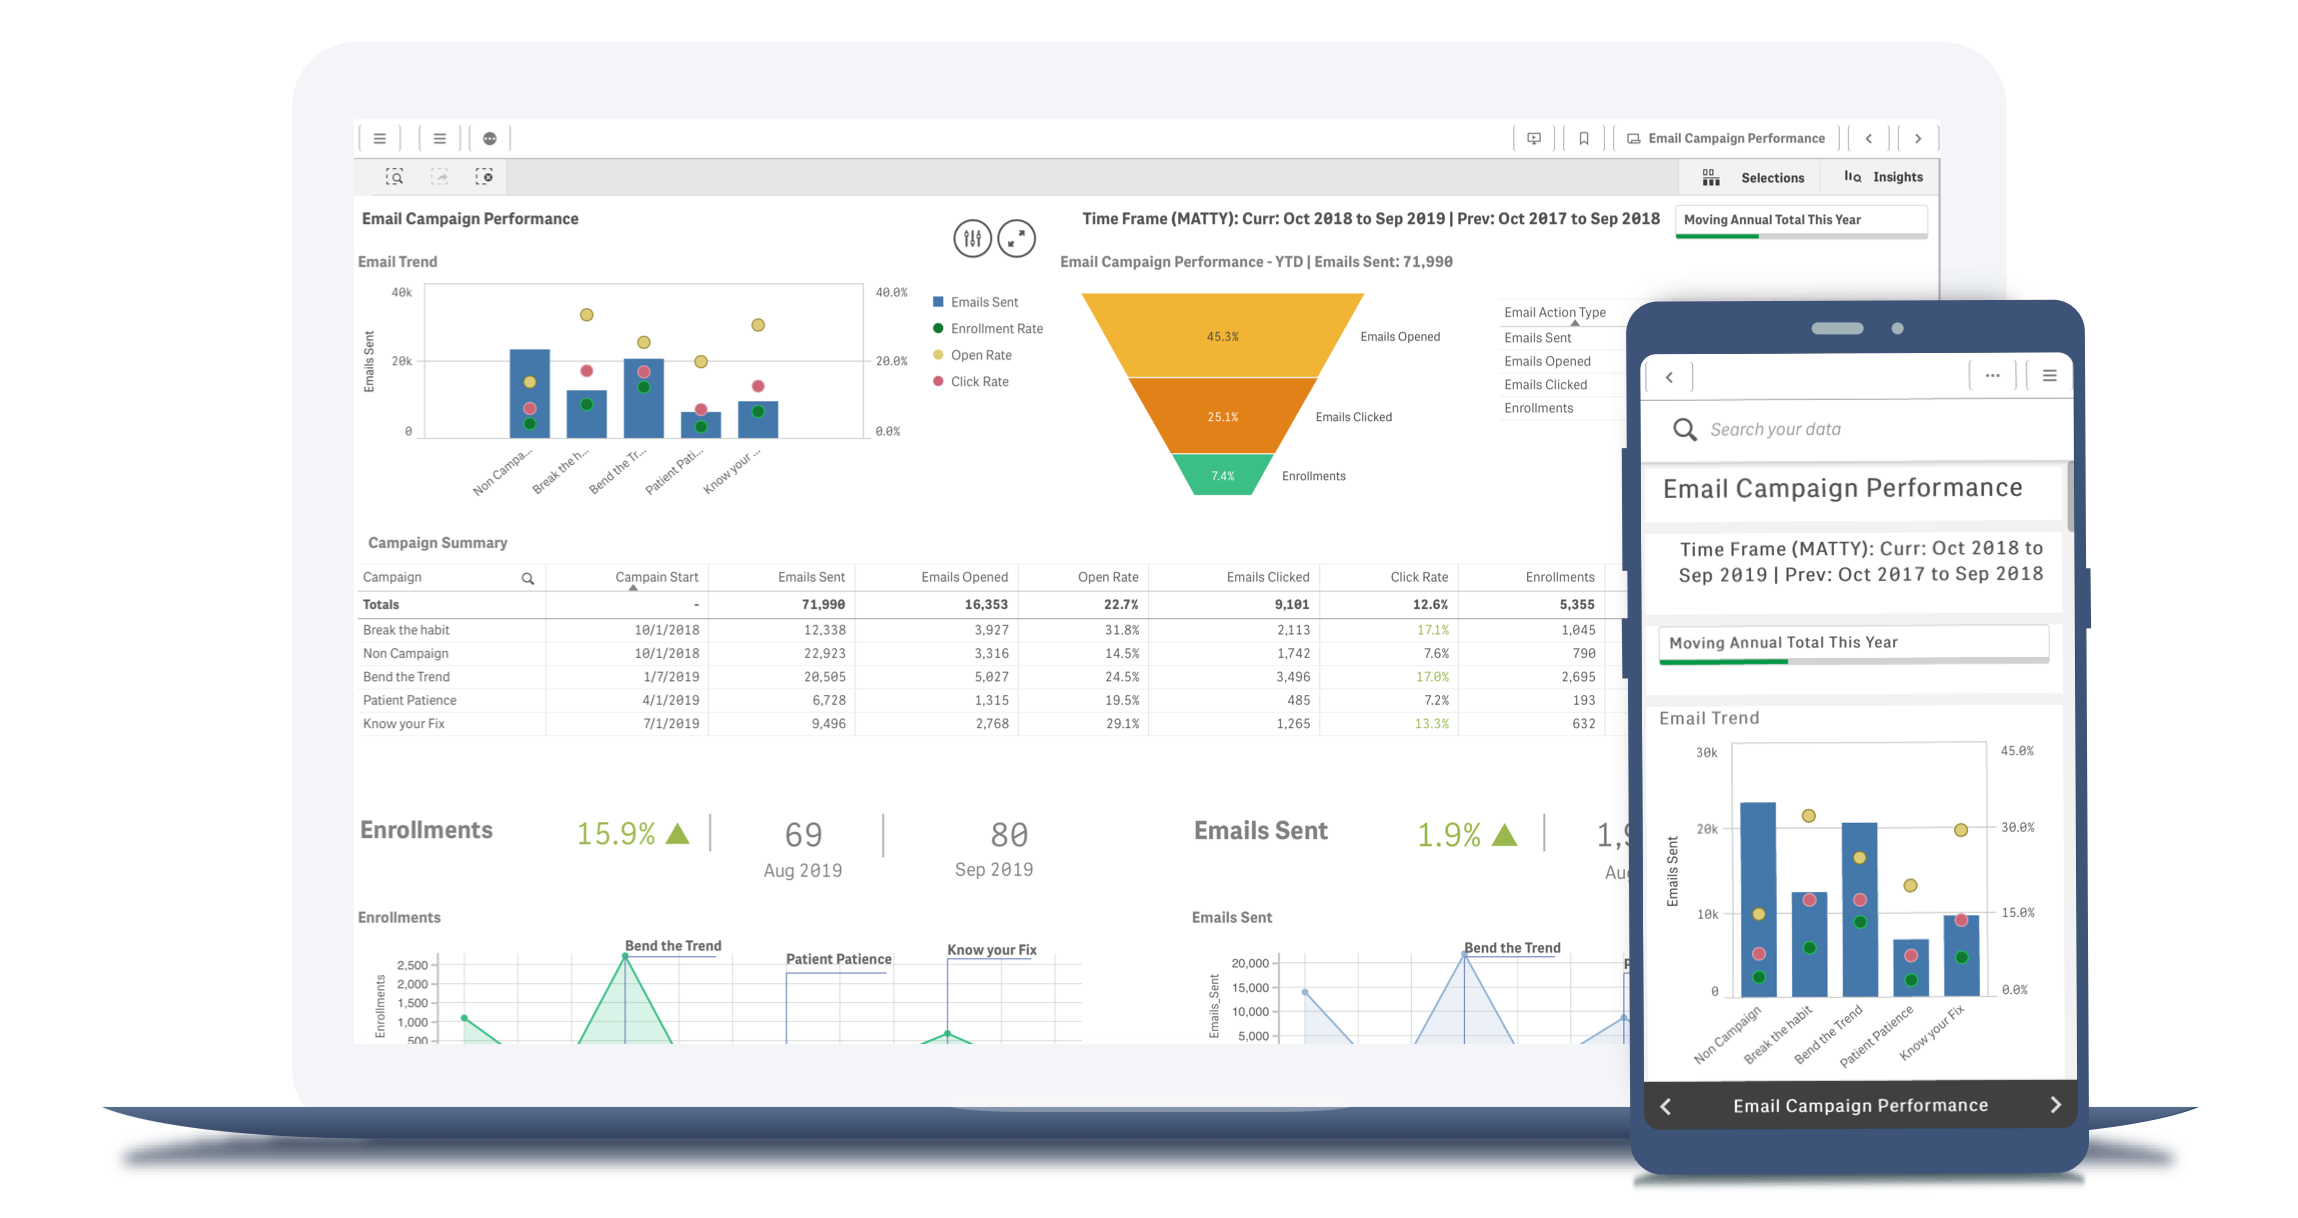 Modern marketing dashboards have interactive charts and insight suggestions from augmented analytics.